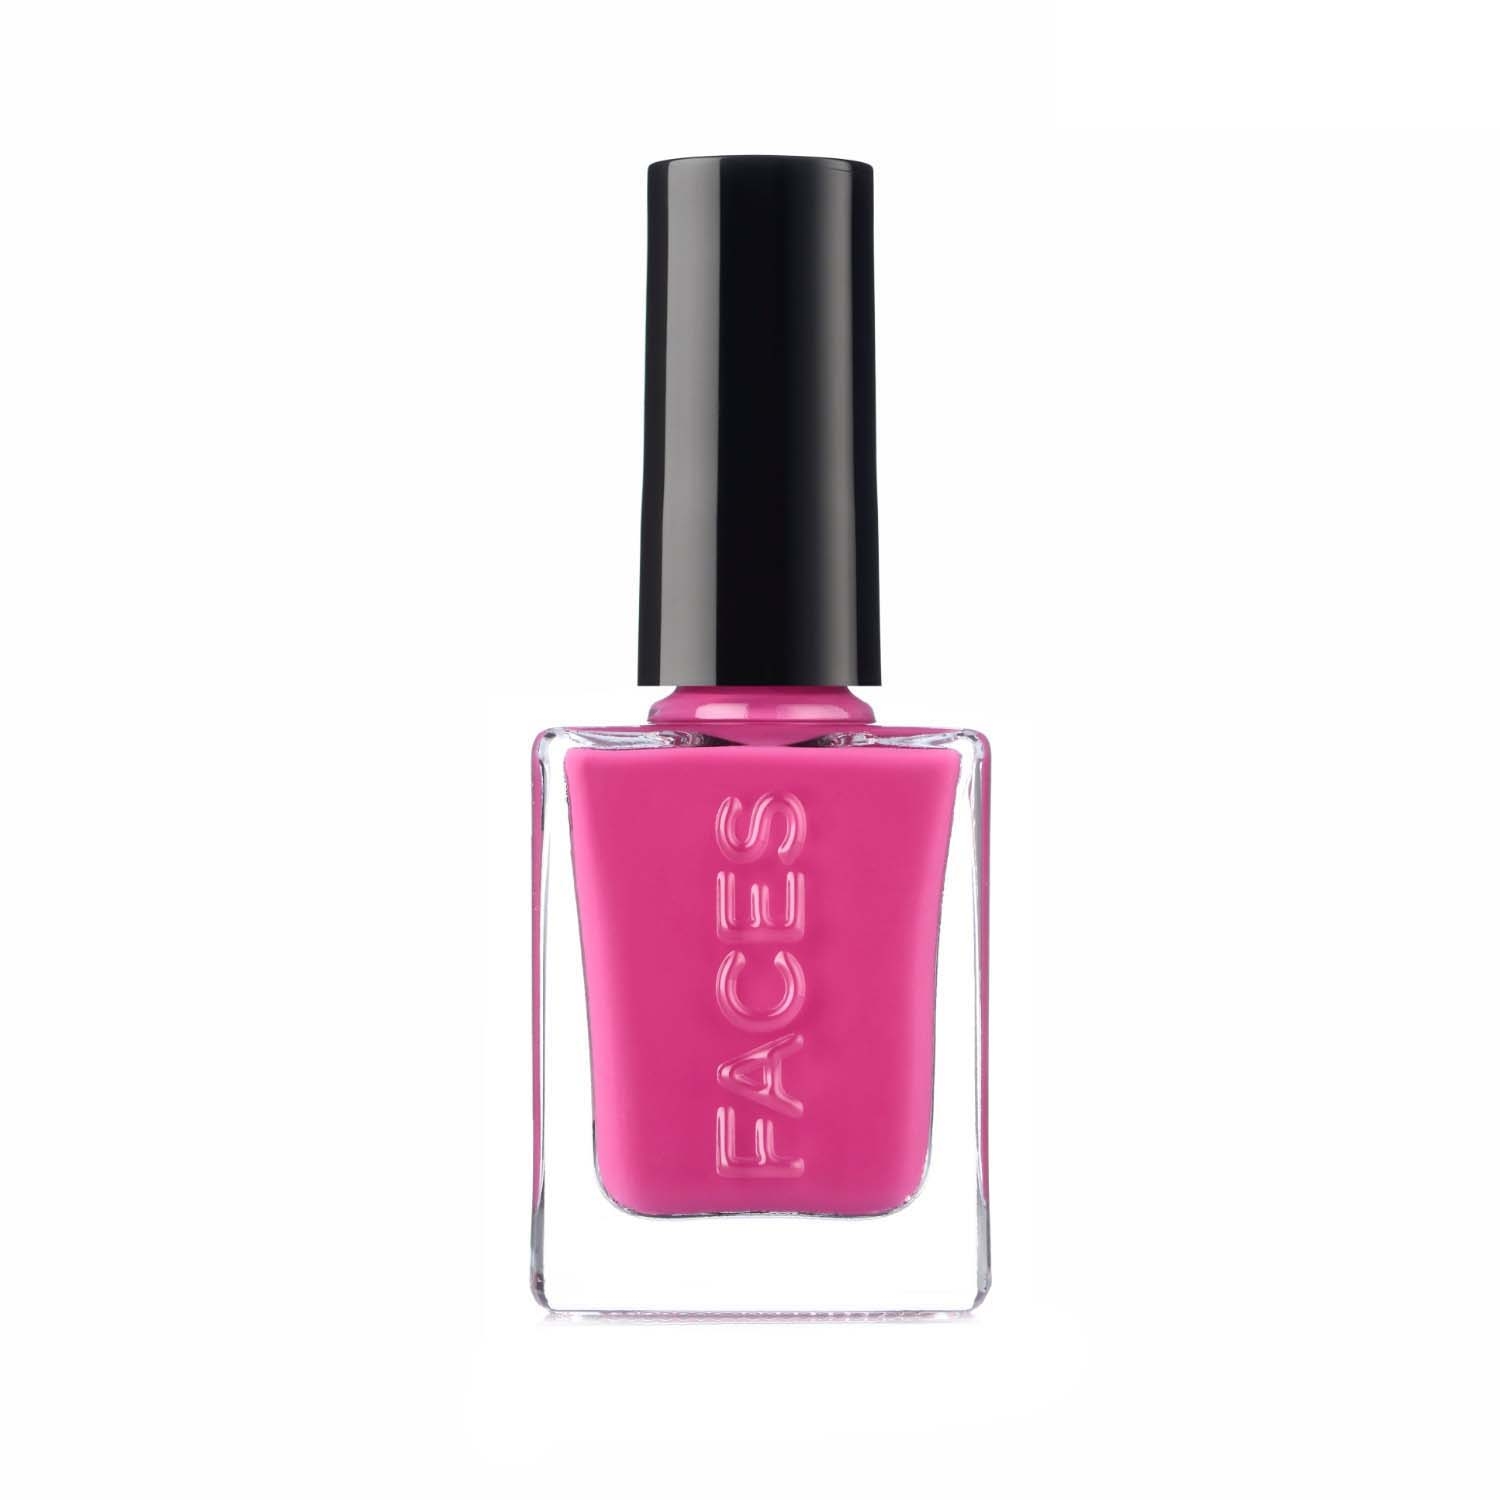 Buy Faces Canada Nail Enamel - 201 Goody (9ml) Online at Best Price in India